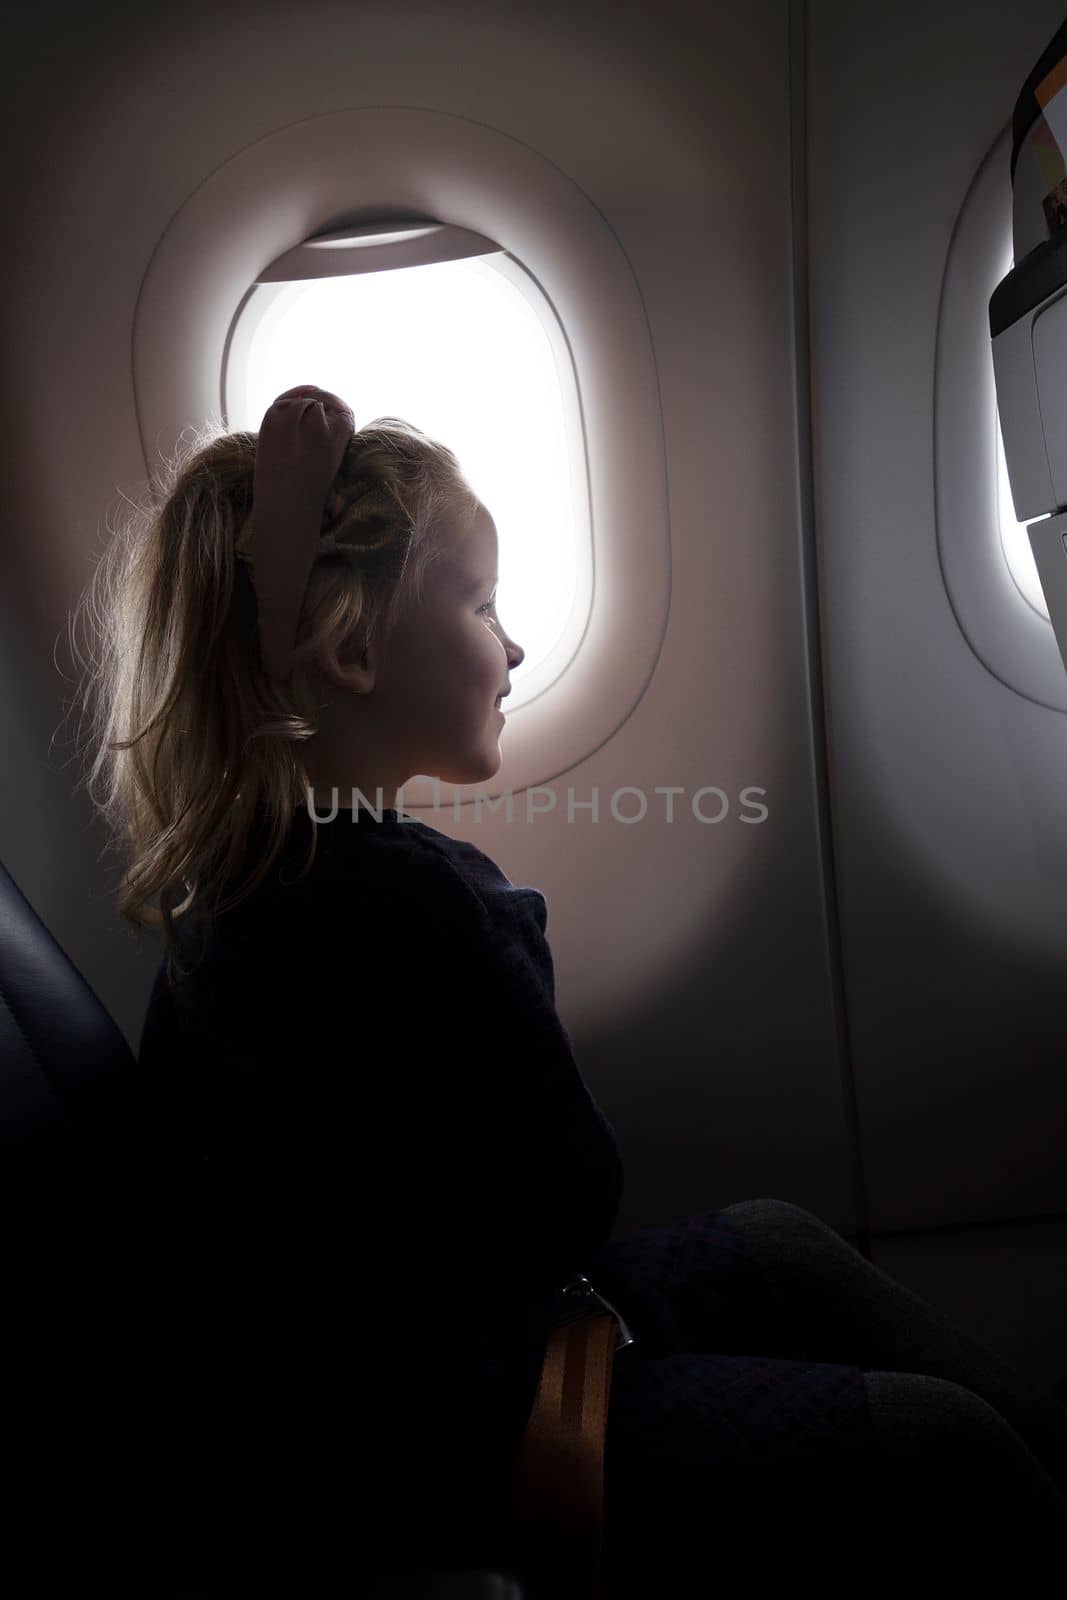 Side view of smiling preteen girl in dress sitting on passenger seat in aircraft near porthole